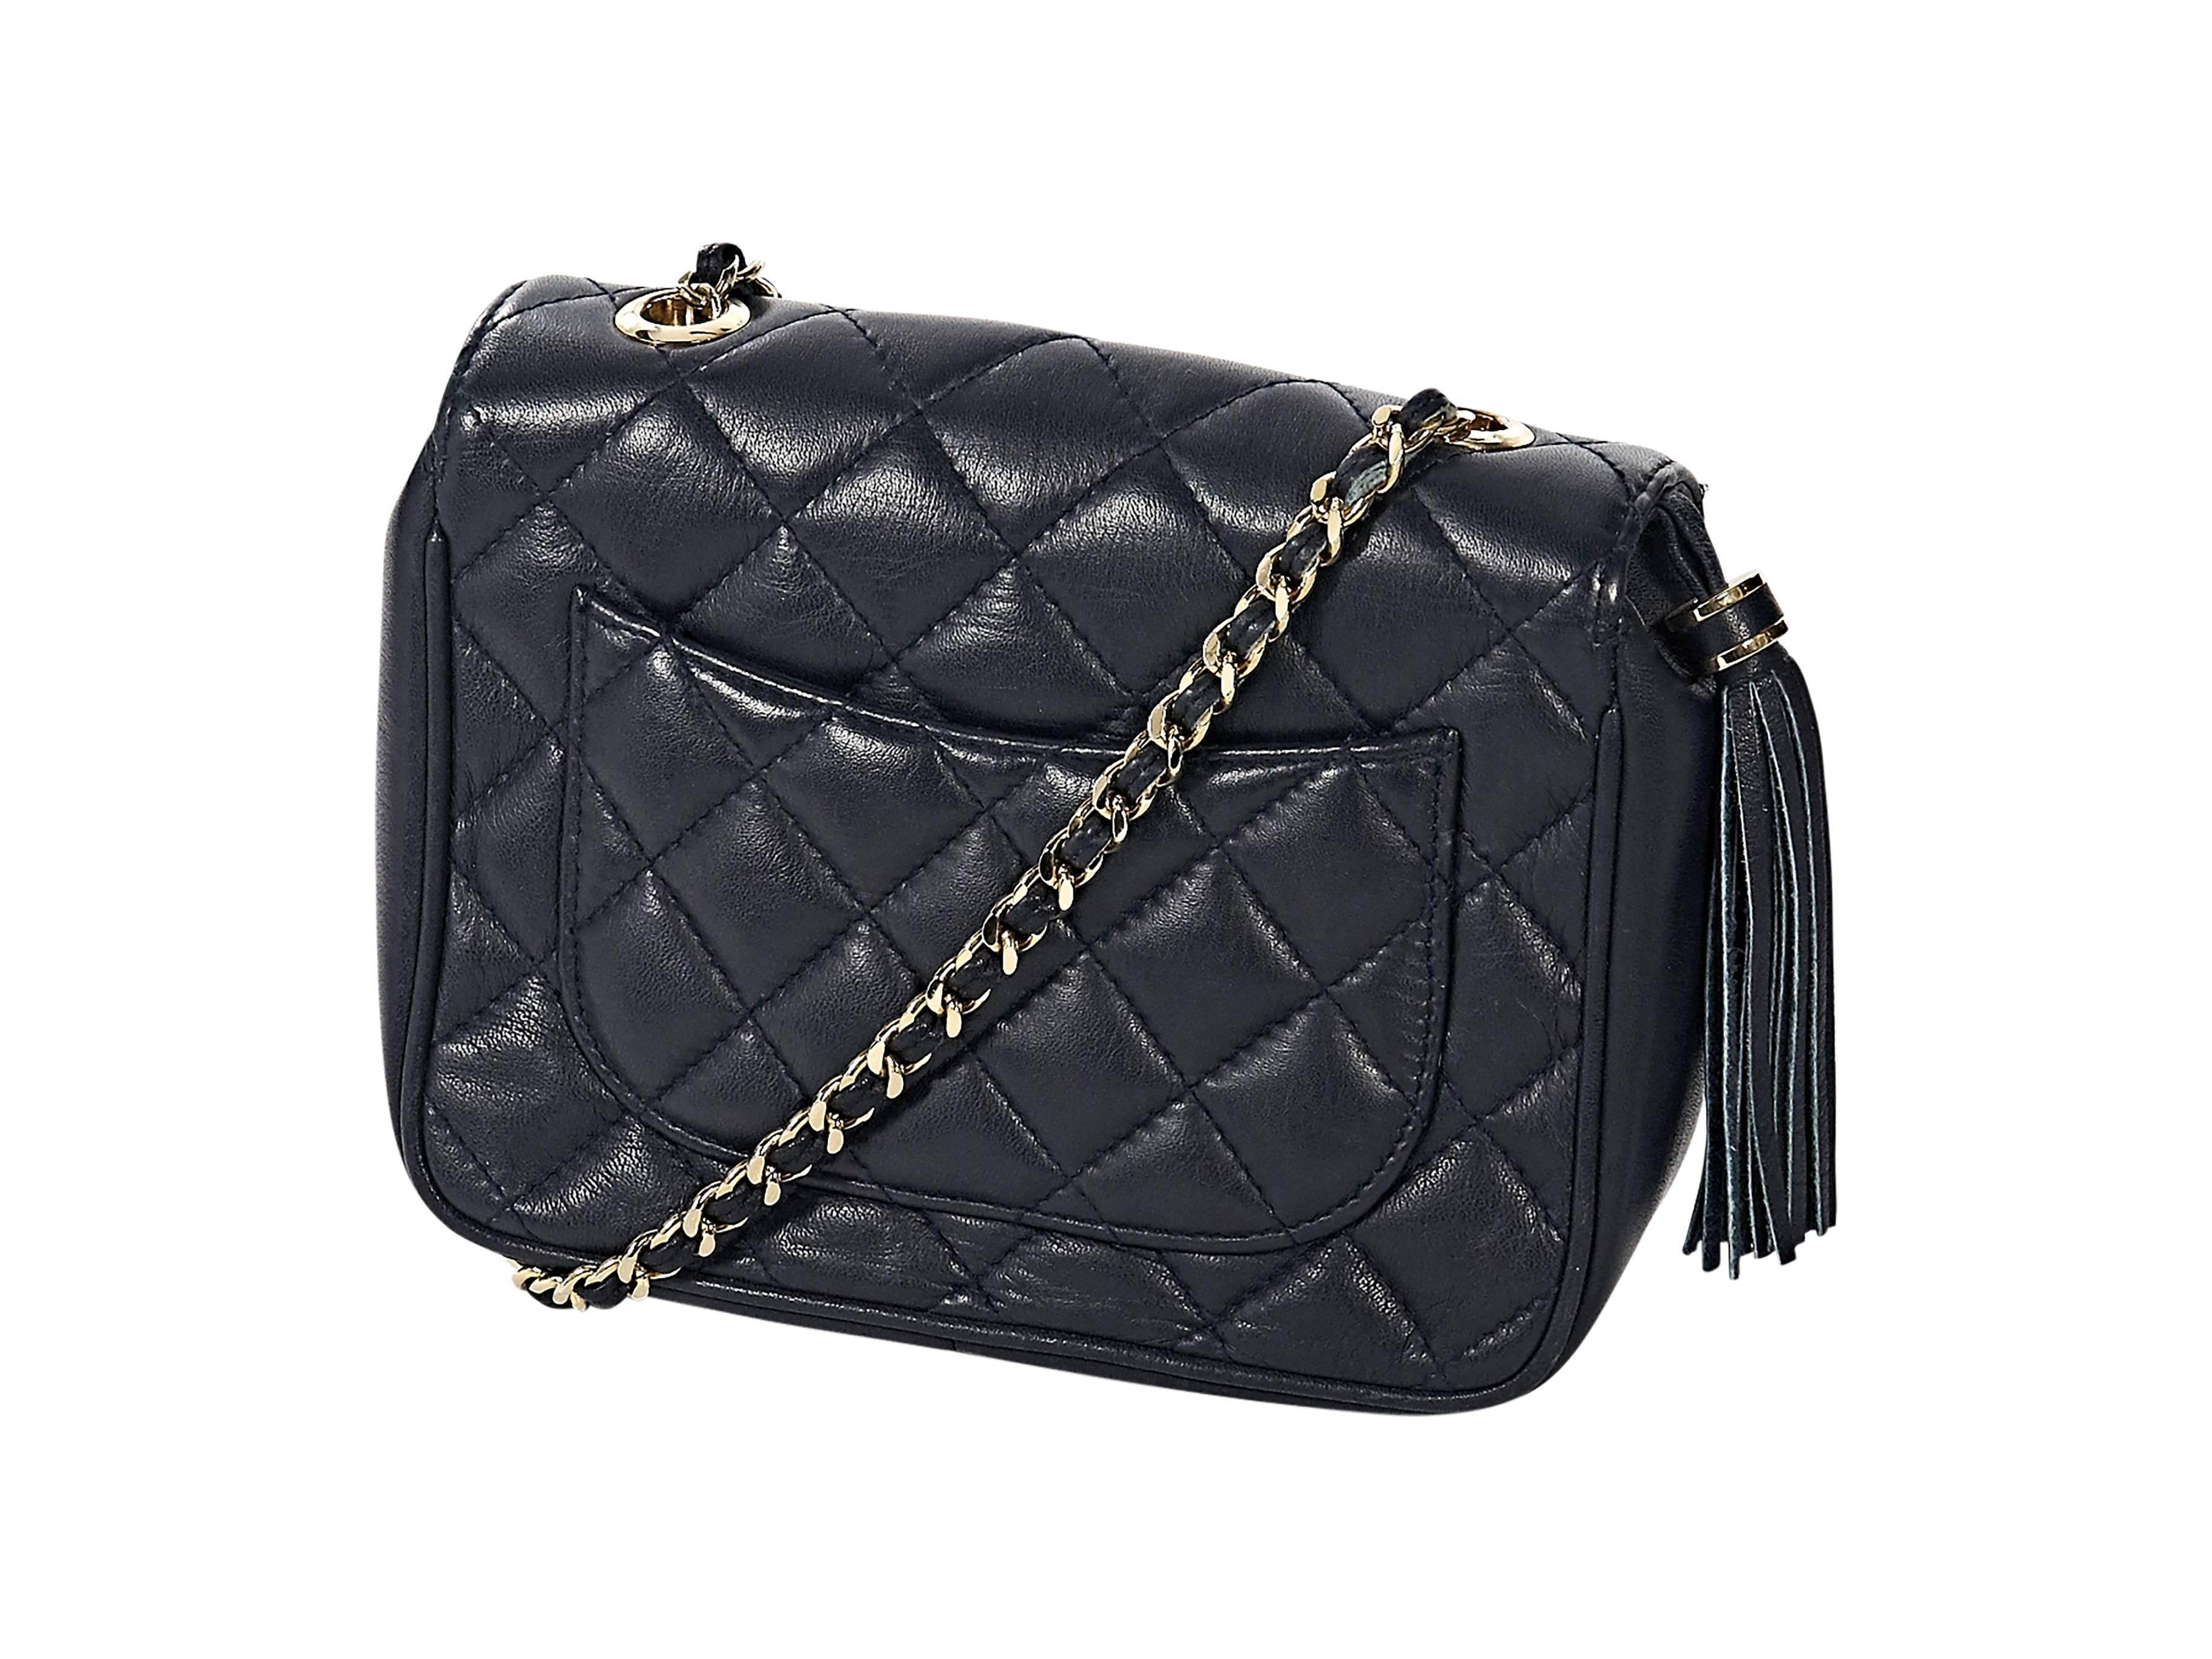 givenchy quilted bag